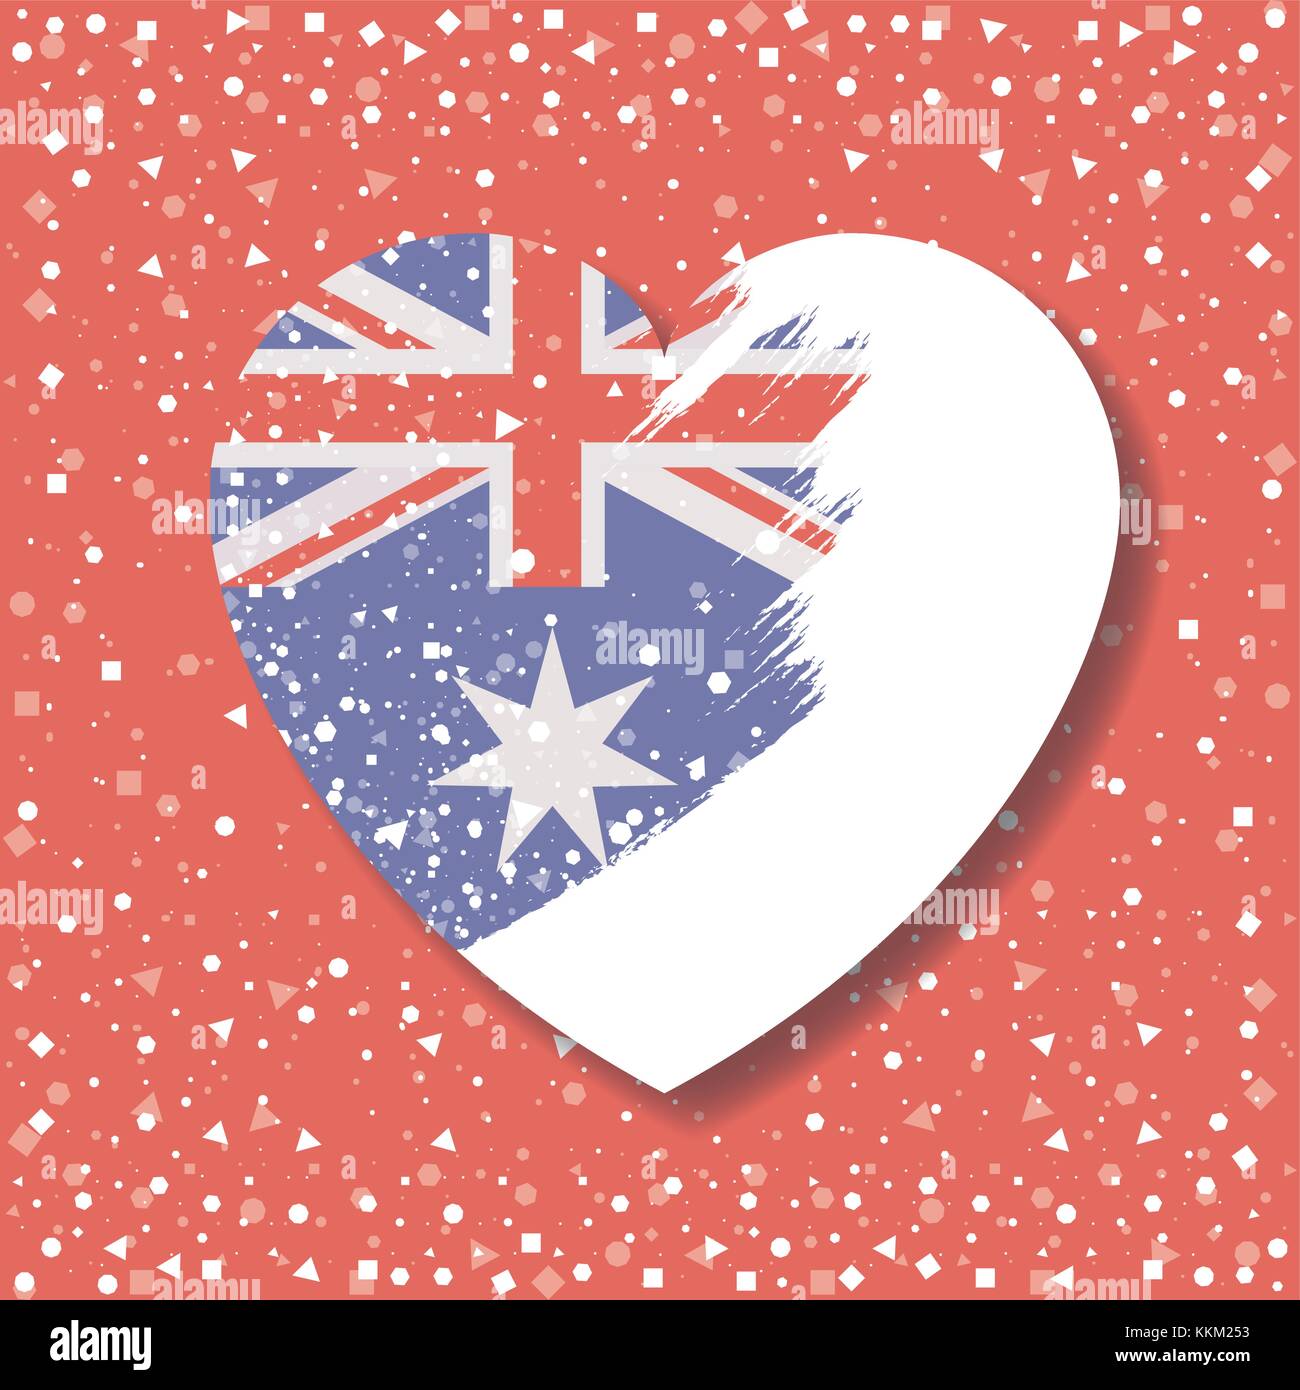 australian flag on heart in opacity graphic in red background with confetti Stock Vector